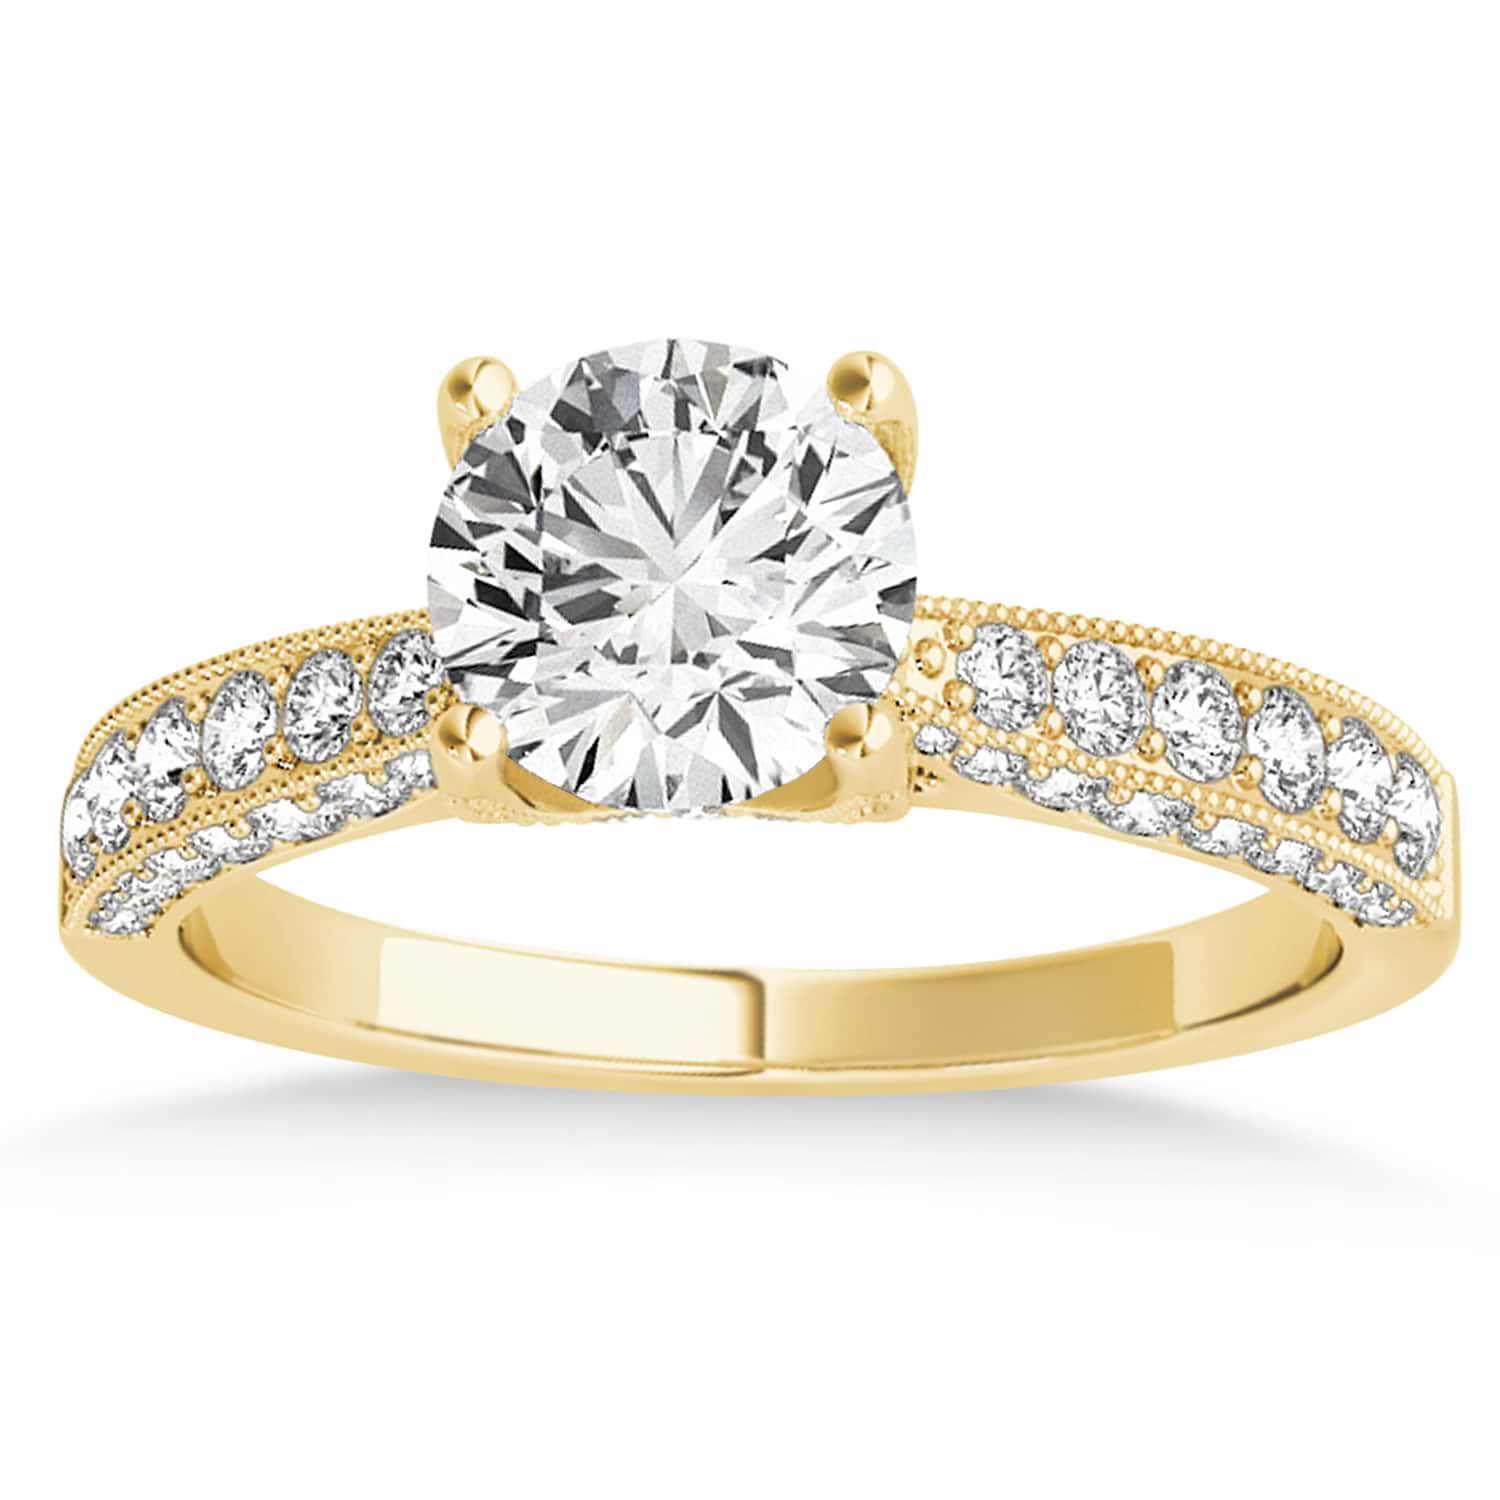 Diamond Engravable Engagement Ring in 18k Yellow Gold (0.45ct)